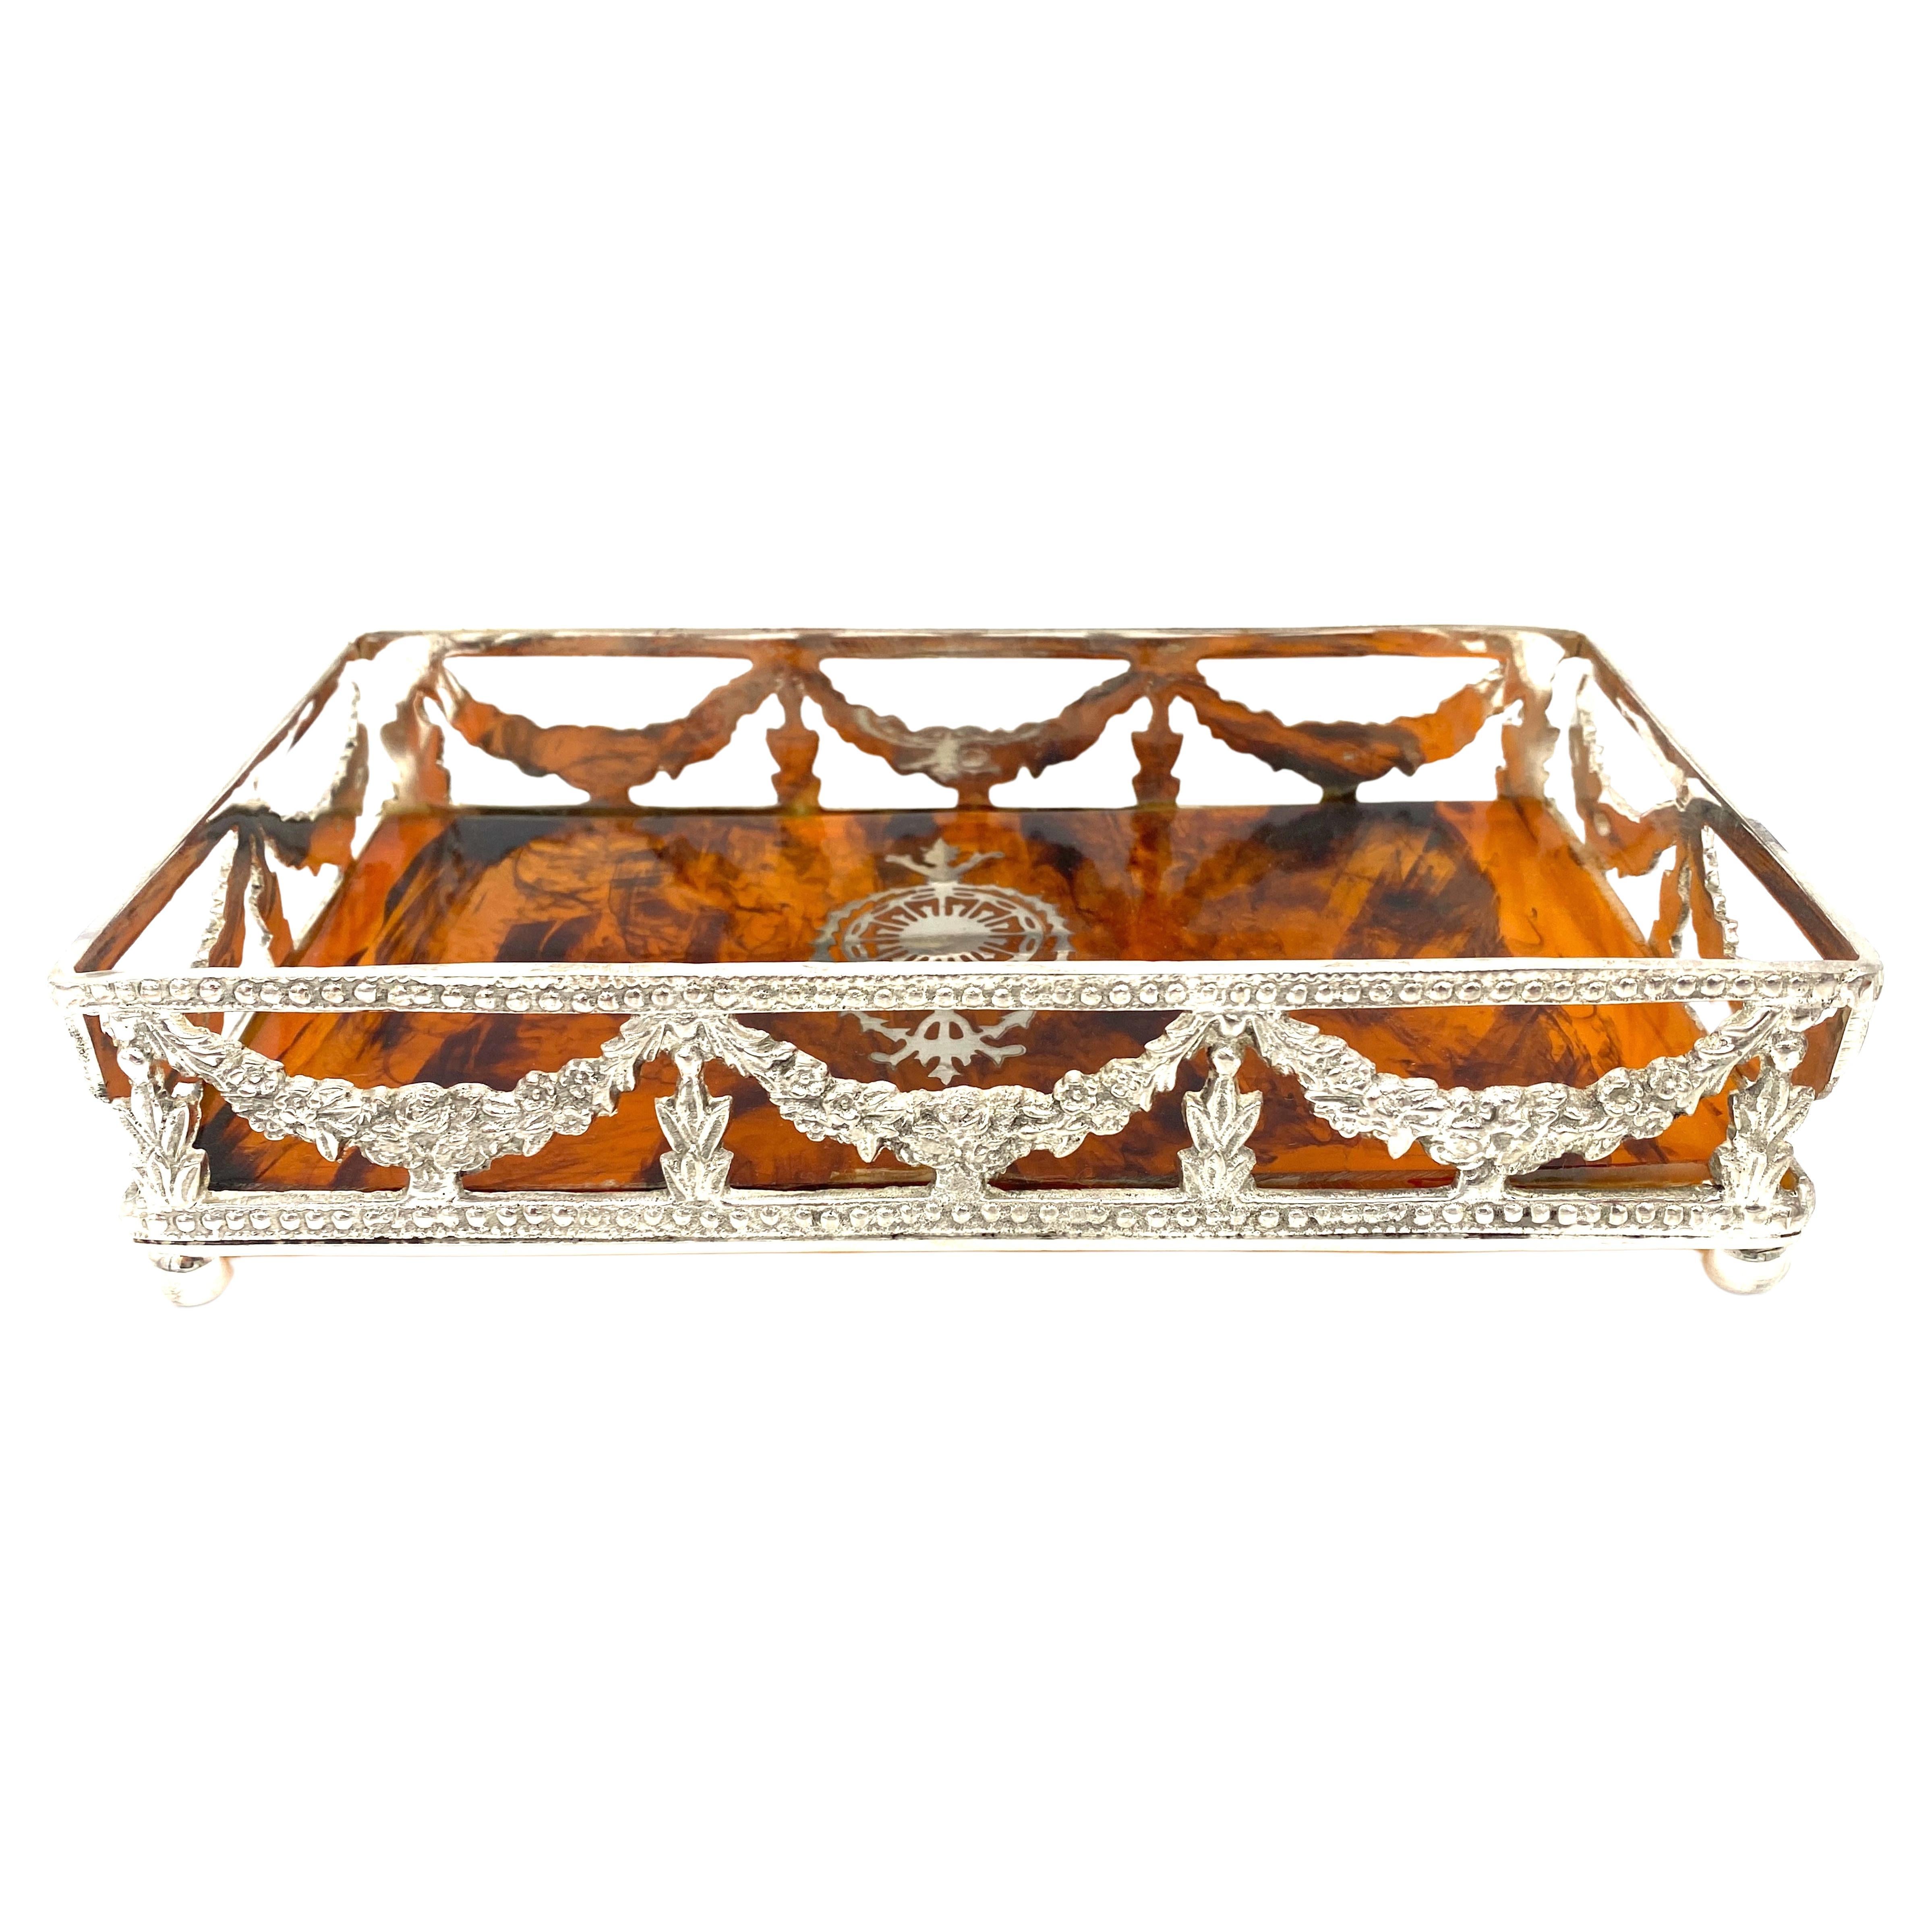 English Neoclassical Silverplated & Faux Tortoise Gallery Tray 2nd Available  For Sale